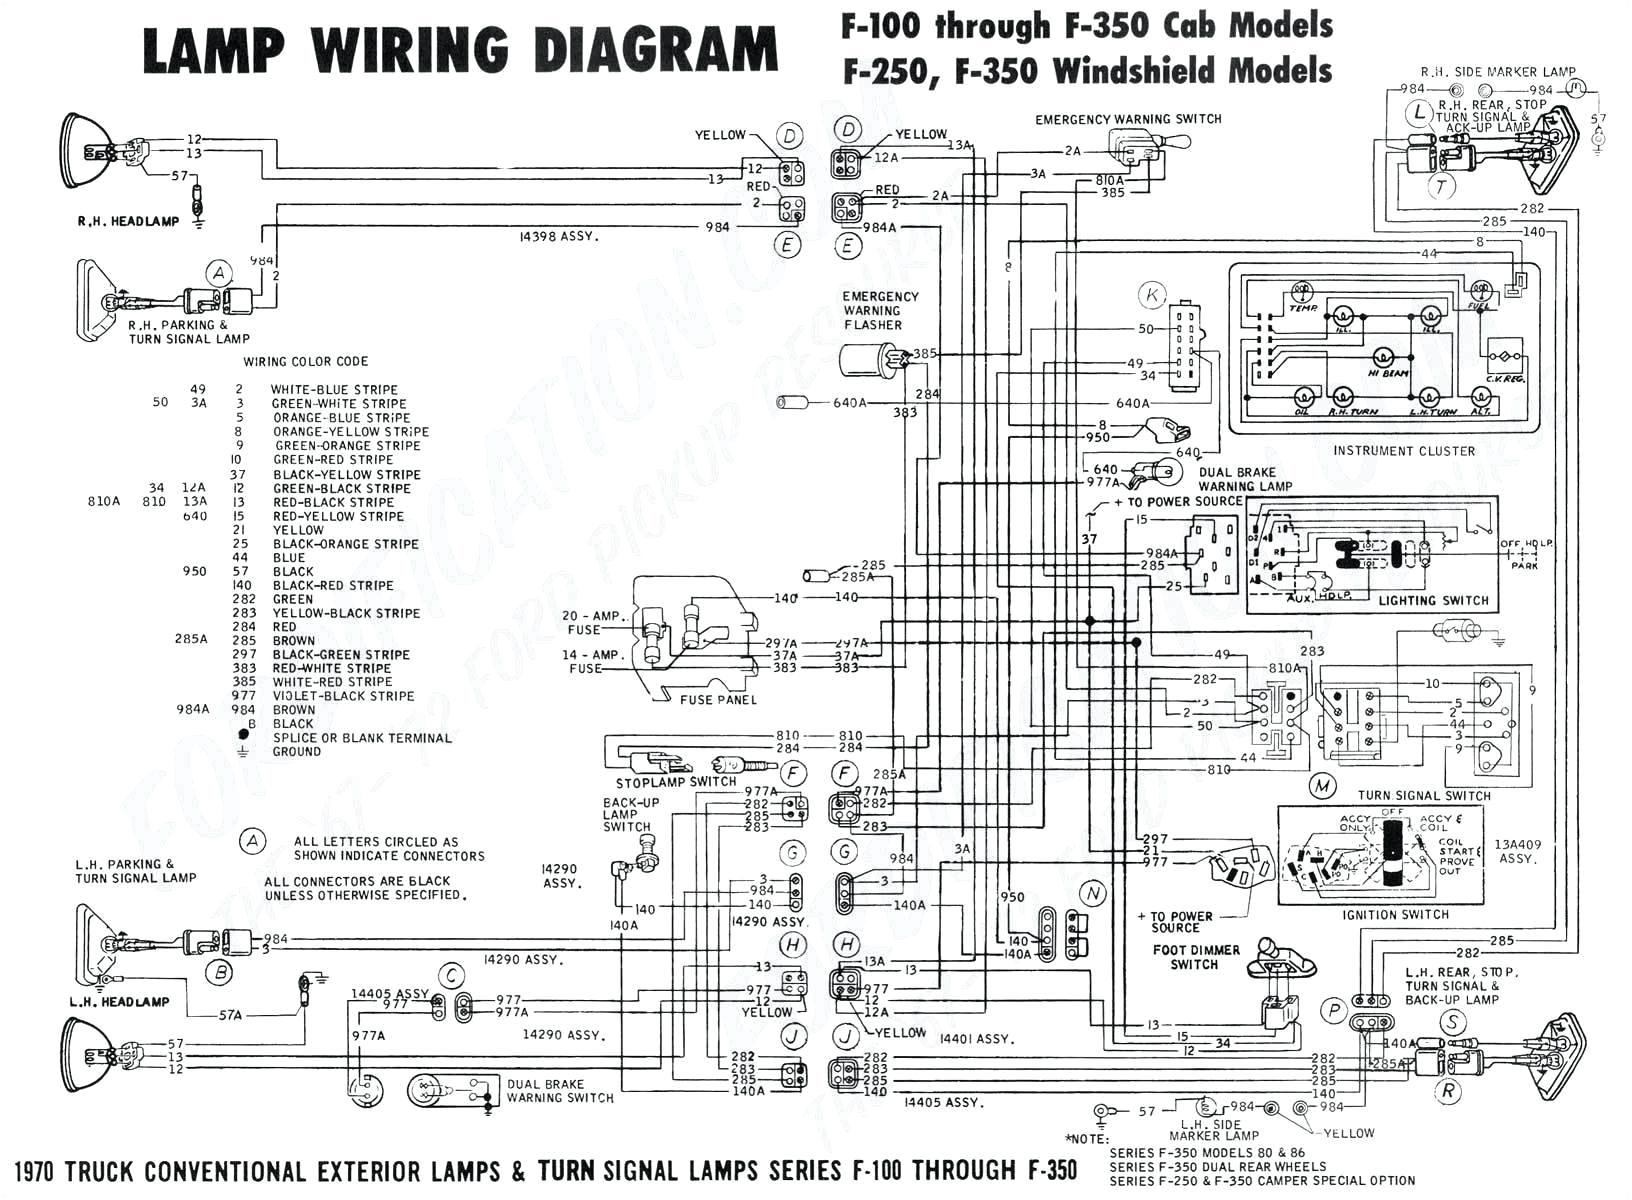 2001 ford f350 wiring schematic wiring diagrams thumbs 2001 f250 trailer wiring diagram 1 jpg